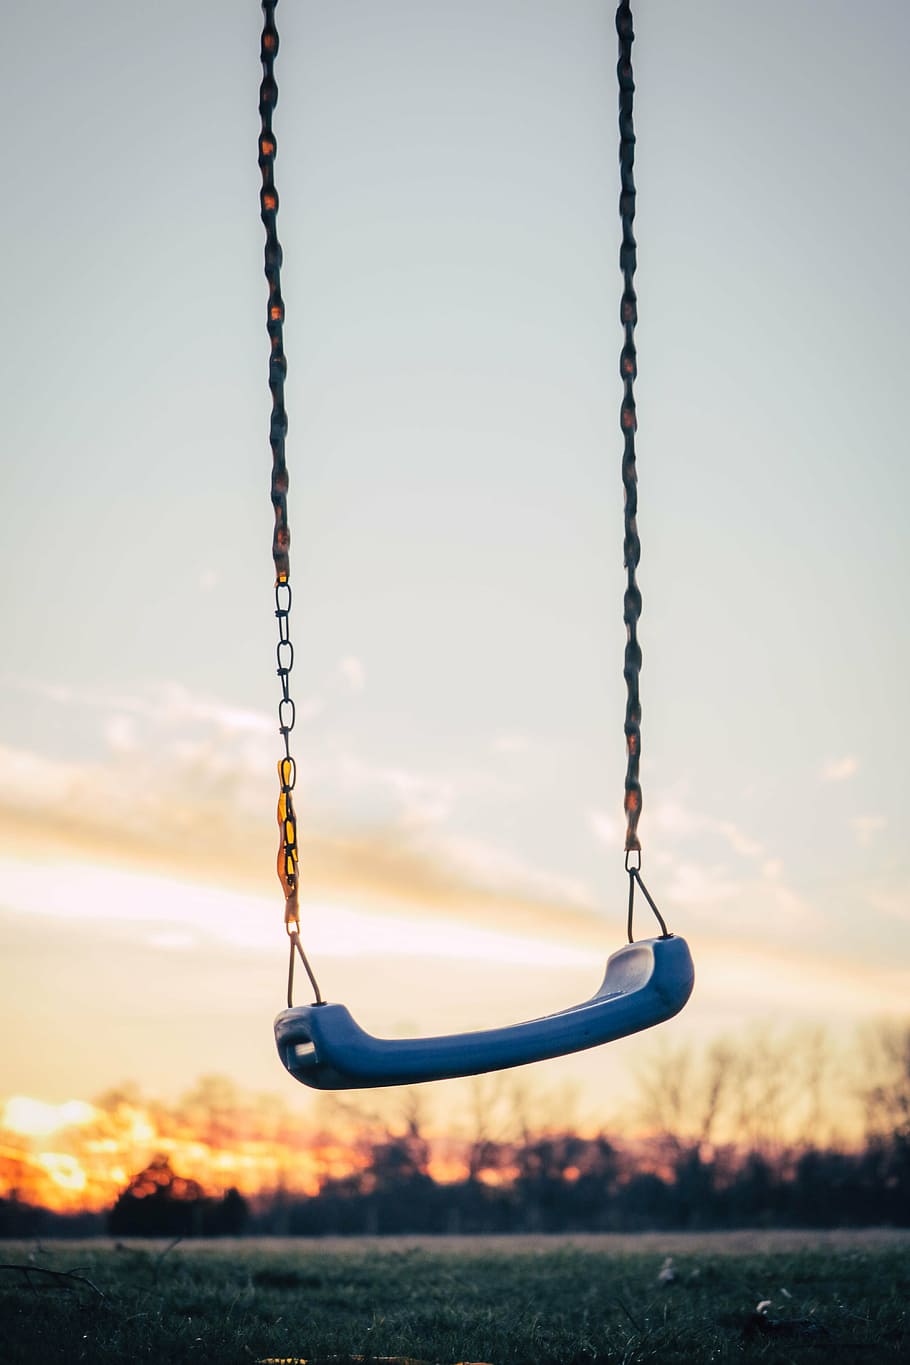 blue swing, playground, swing, sit, chain, sunset, clouds, sky, hanging, performance